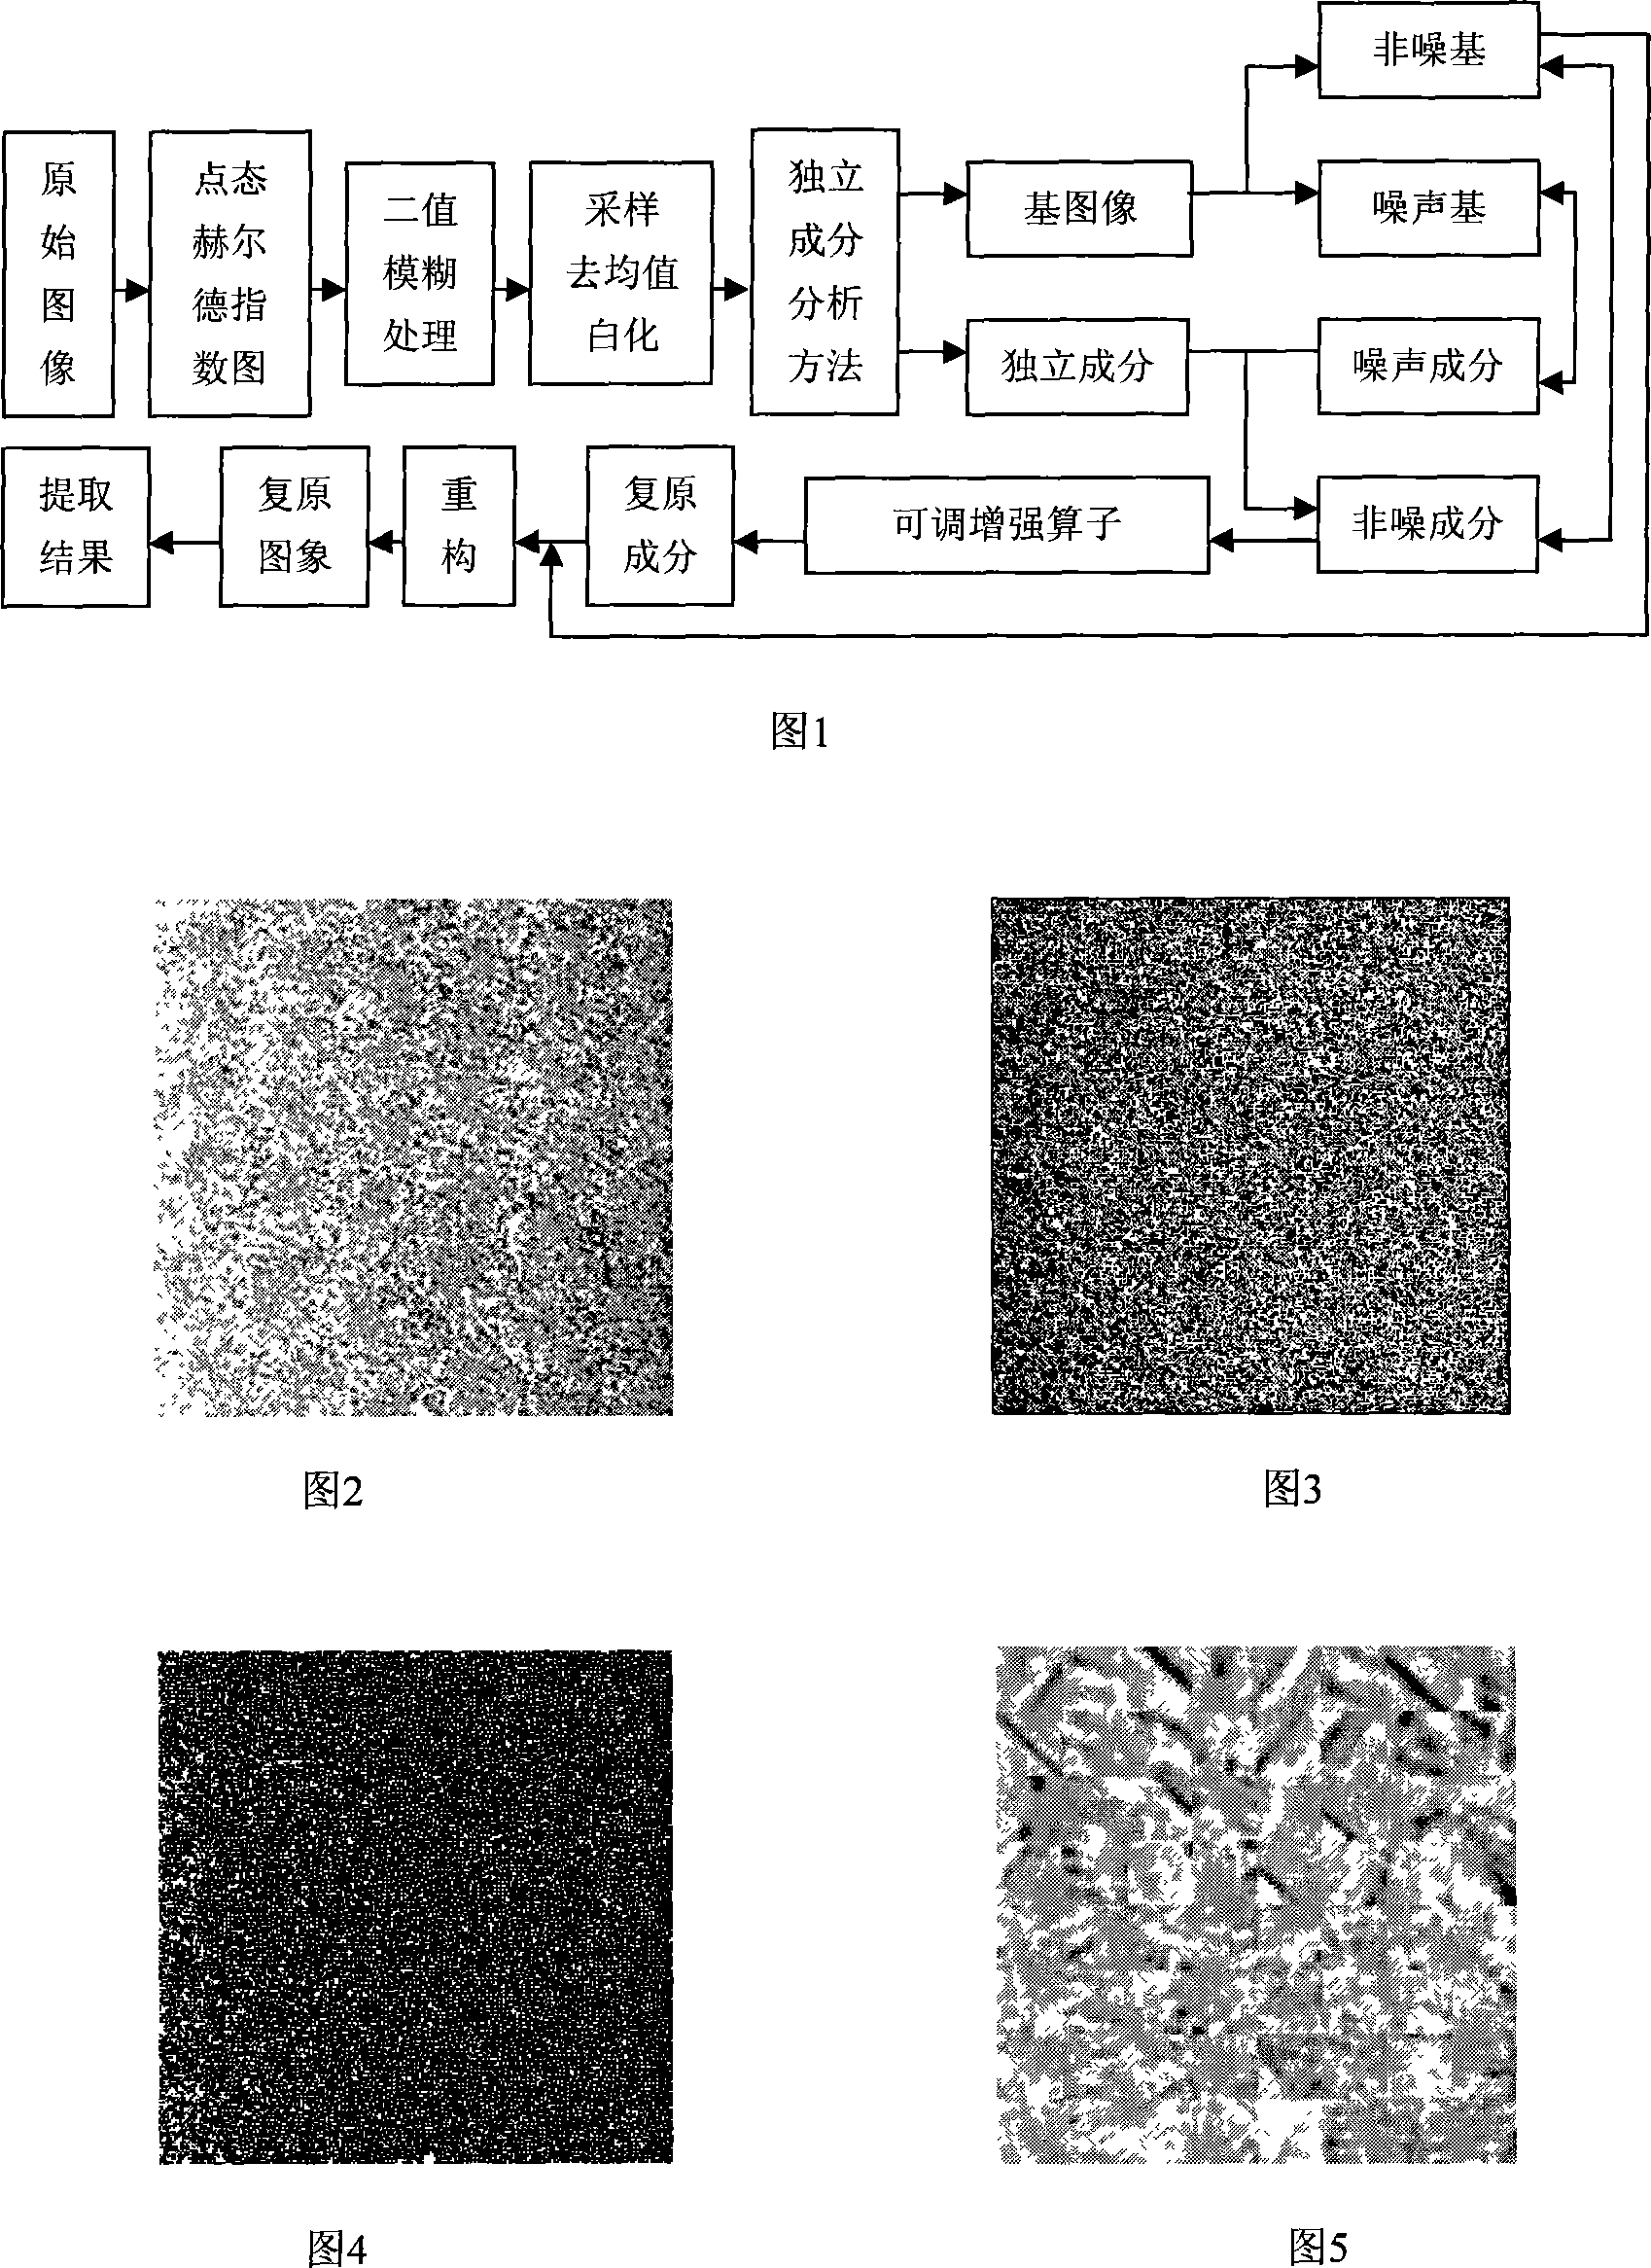 Method for extracting sea area synthetic aperture radar image point target